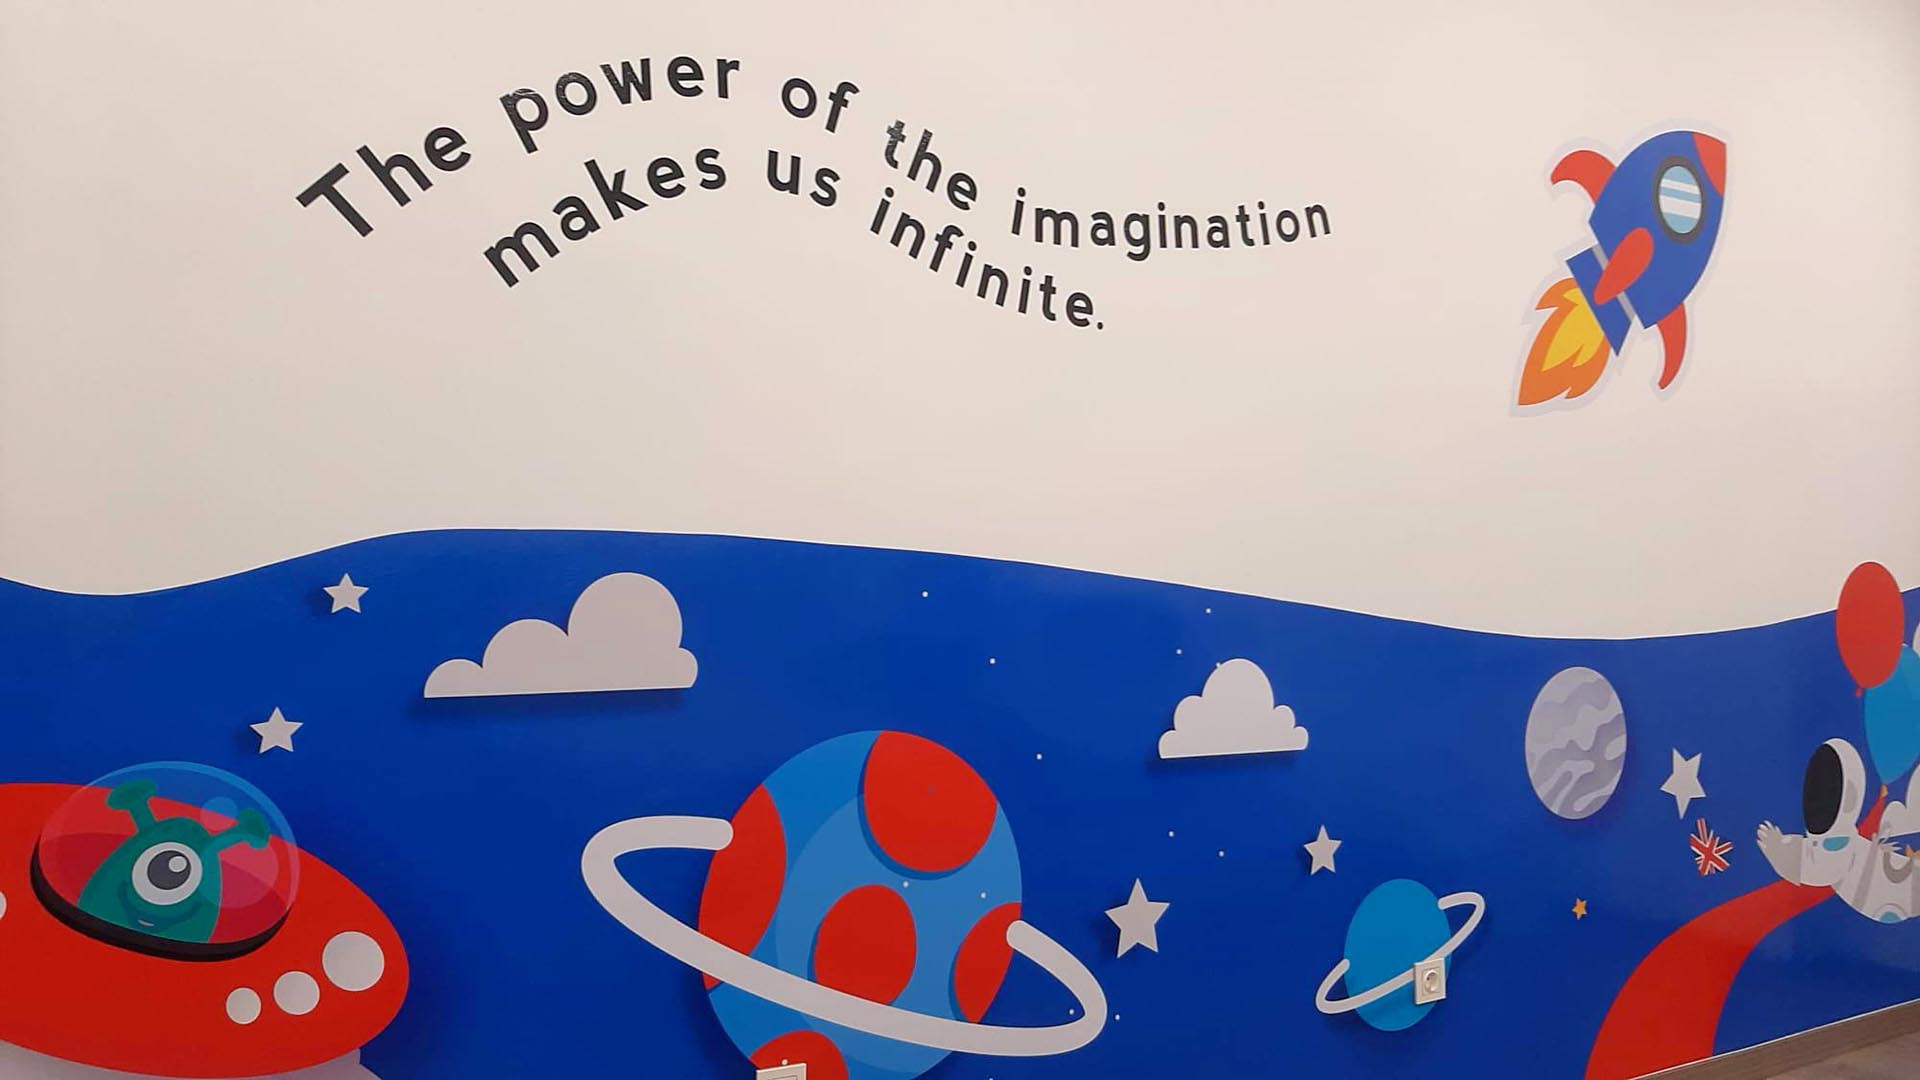 The power of the imagination picture